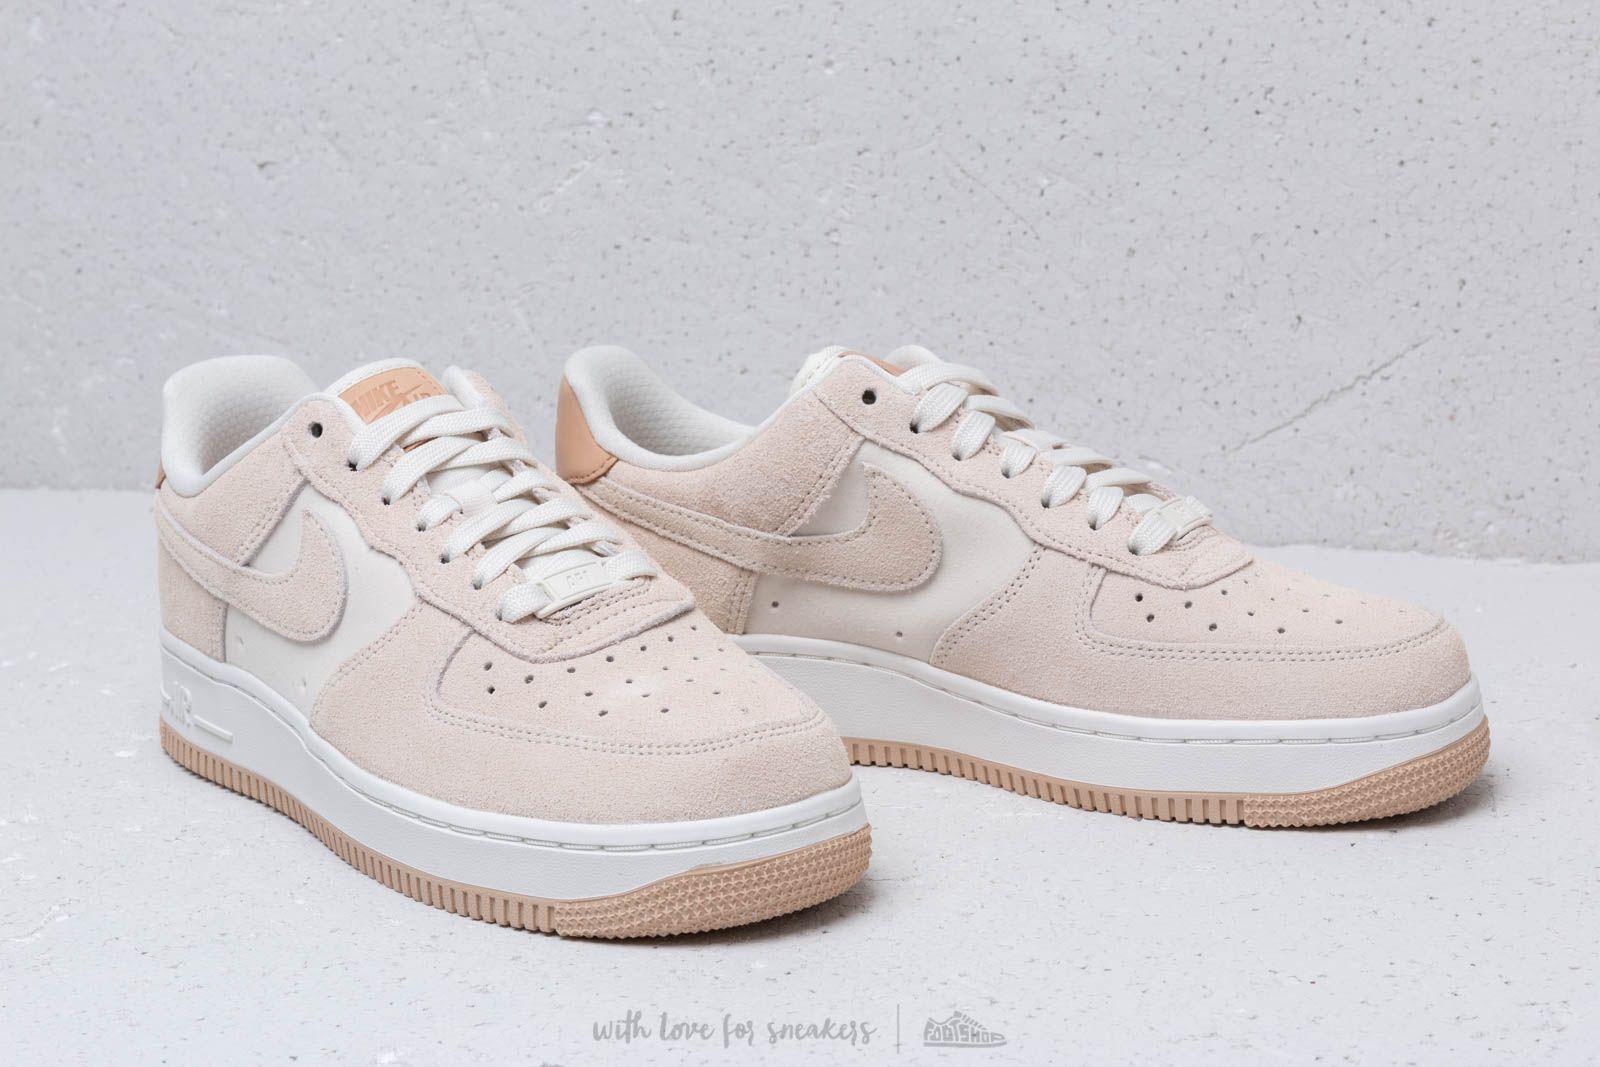 Nike Suede Wmns Air Force 1 '07 Prm Pale Ivory/ Pale Ivory-summit White -  Lyst